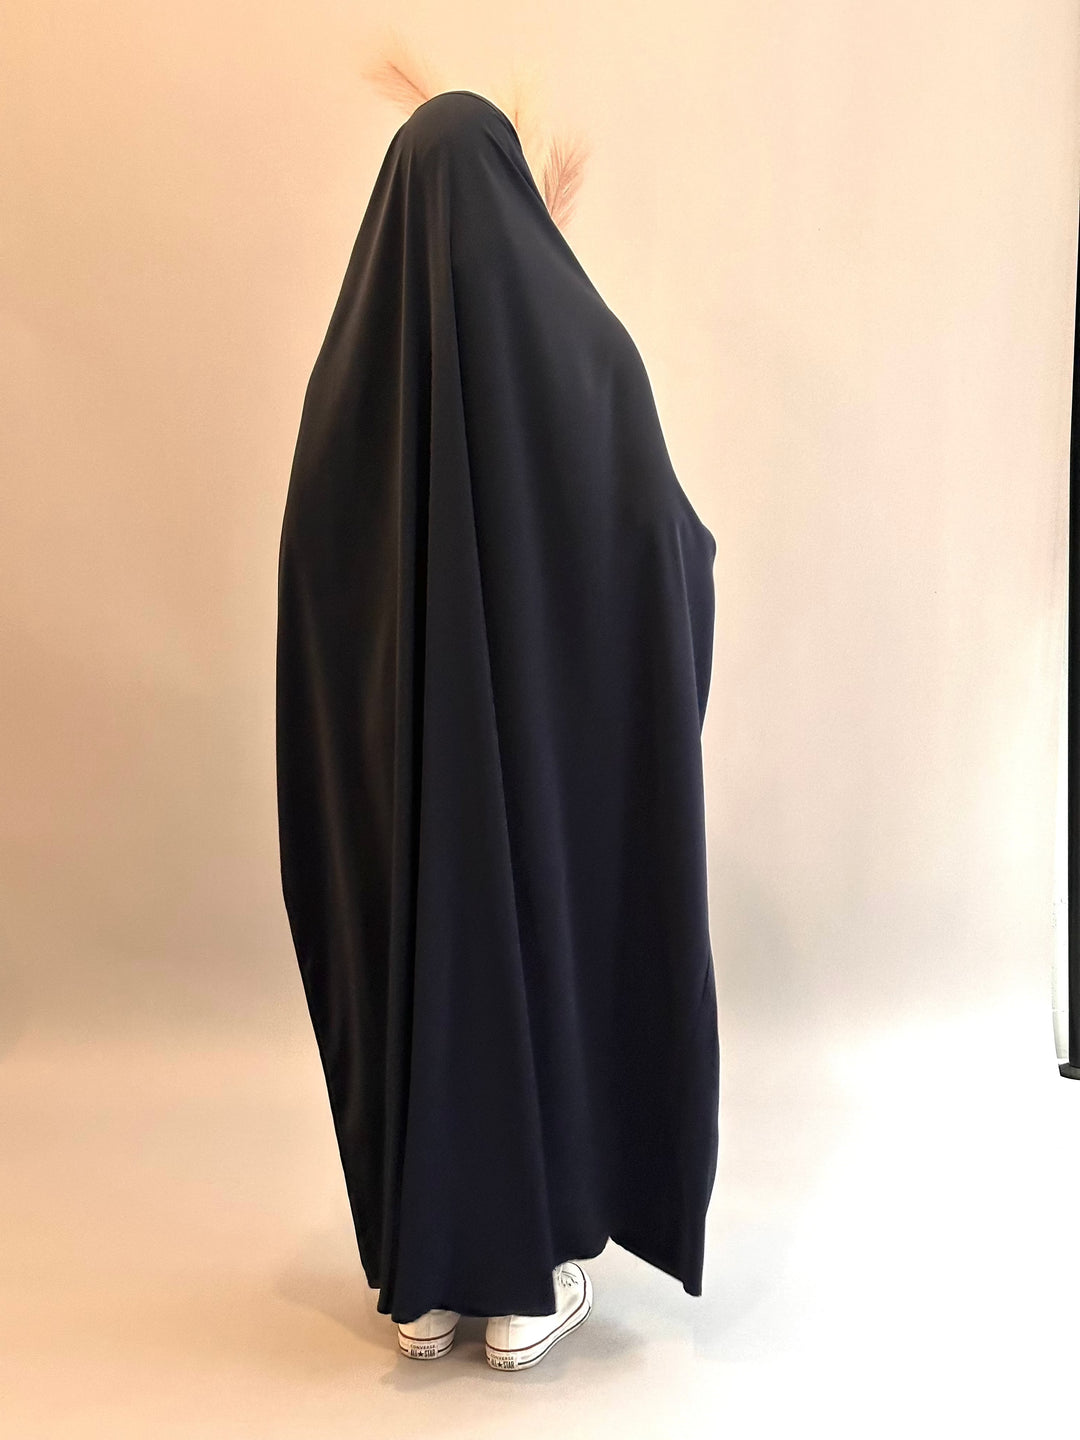 Get trendy with Sarah Niqab Jilbab - Navy -  available at Voilee NY. Grab yours for $17.99 today!